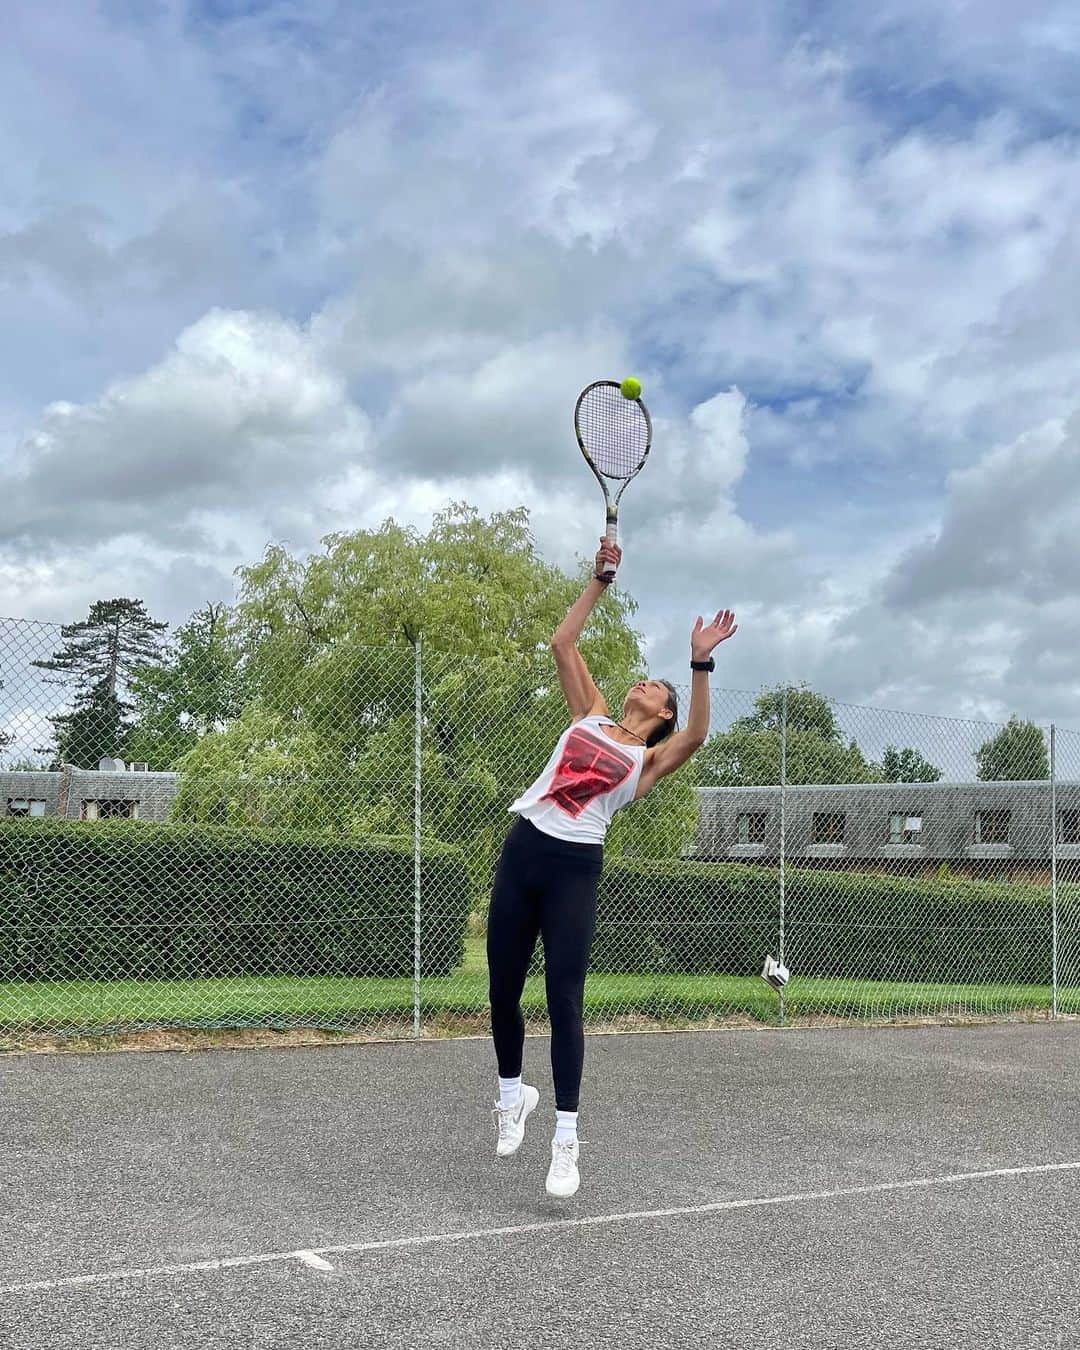 メラニー・サイクスのインスタグラム：「In my happy place on a tennis court. 🎾😁🤸🏽‍♂️💫❤️ When I was a child all I wanted to be was a professional tennis player. I would devour Wimbledon. I talk about my passion for tennis and specifically Wimbledon  in my book so significant it was.  I've had the pleasure of playing and being coached sporadically over the years but I've never played consistently enough to get really good at it, but as an athletic person (which I've definitely established I am  in the last two decades) , I would have loved to spend my professional life doing just that.  I love the process of getting fit, centred physically and mentally and being strong. I understand the dedication it takes to get to that sort of level and it appeals to my nature and it is that I love watching in the players. 😁  Watching  Wimbledon specifically every year for me is so sweet and when I've ever had the opportunity to go and I have done, not least with one of my biggest tennis idols in my young life, Boris Becker, It feels unreal and magical.  I say in my book that Wimbledon might as well have been on Mars, when I was a kid growing up in the north.   For me it's the stuff of dreams.  So here's me giddy as a kipper on court and refreshing my brain on my serve.   Now back to Wimbledon 😍  Enjoy the tennis   New balls please 😁  @champneysspas   Thank you @archielandymore_  for the coaching 😁💫 & the photography lol   #childhoodpassions #tennislove  #tennis🎾  #practicingserve  #svitolinaforthewin」